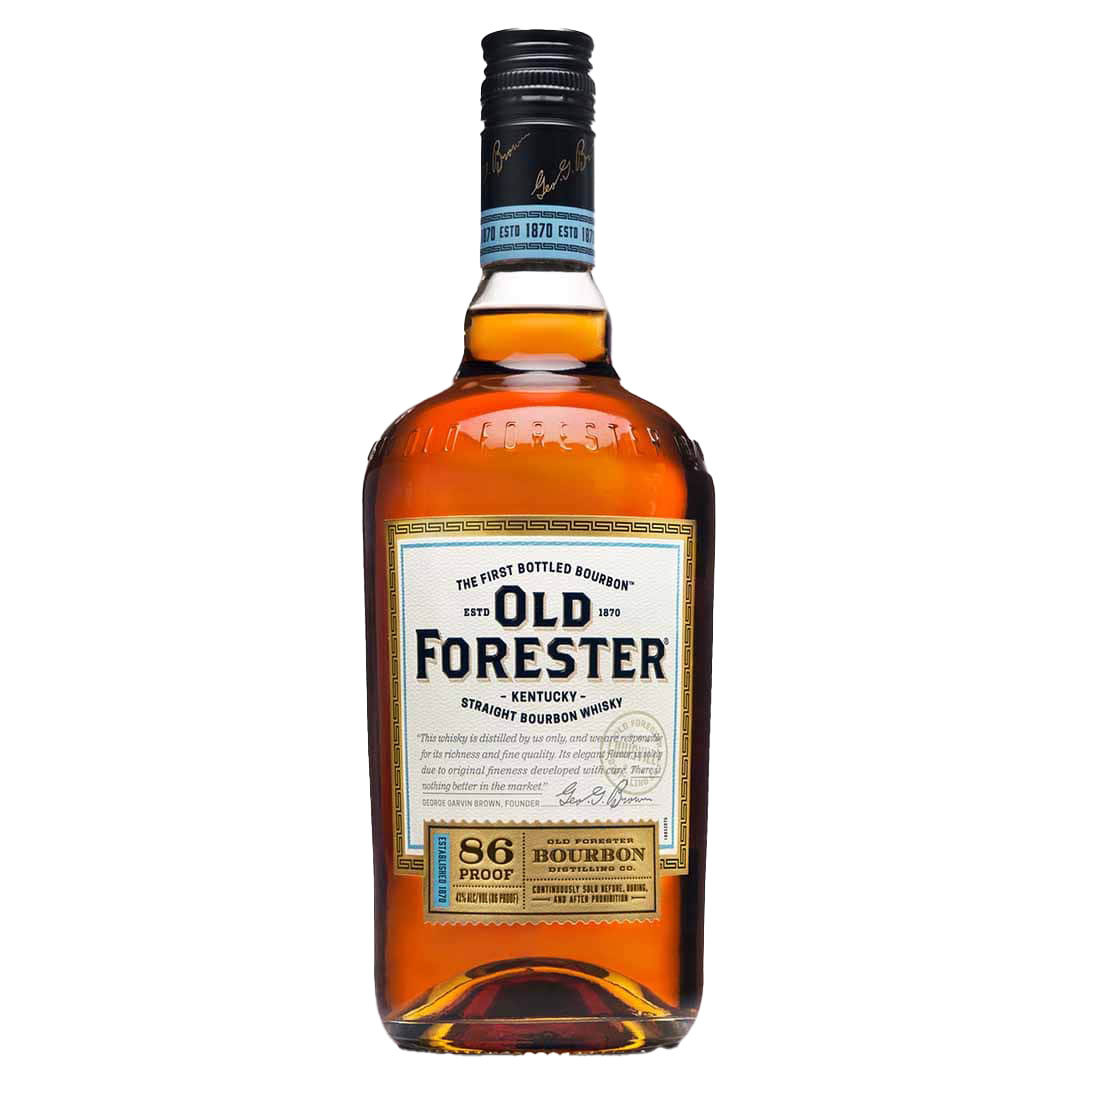 LB_Bottle-Old-Forester-Classic